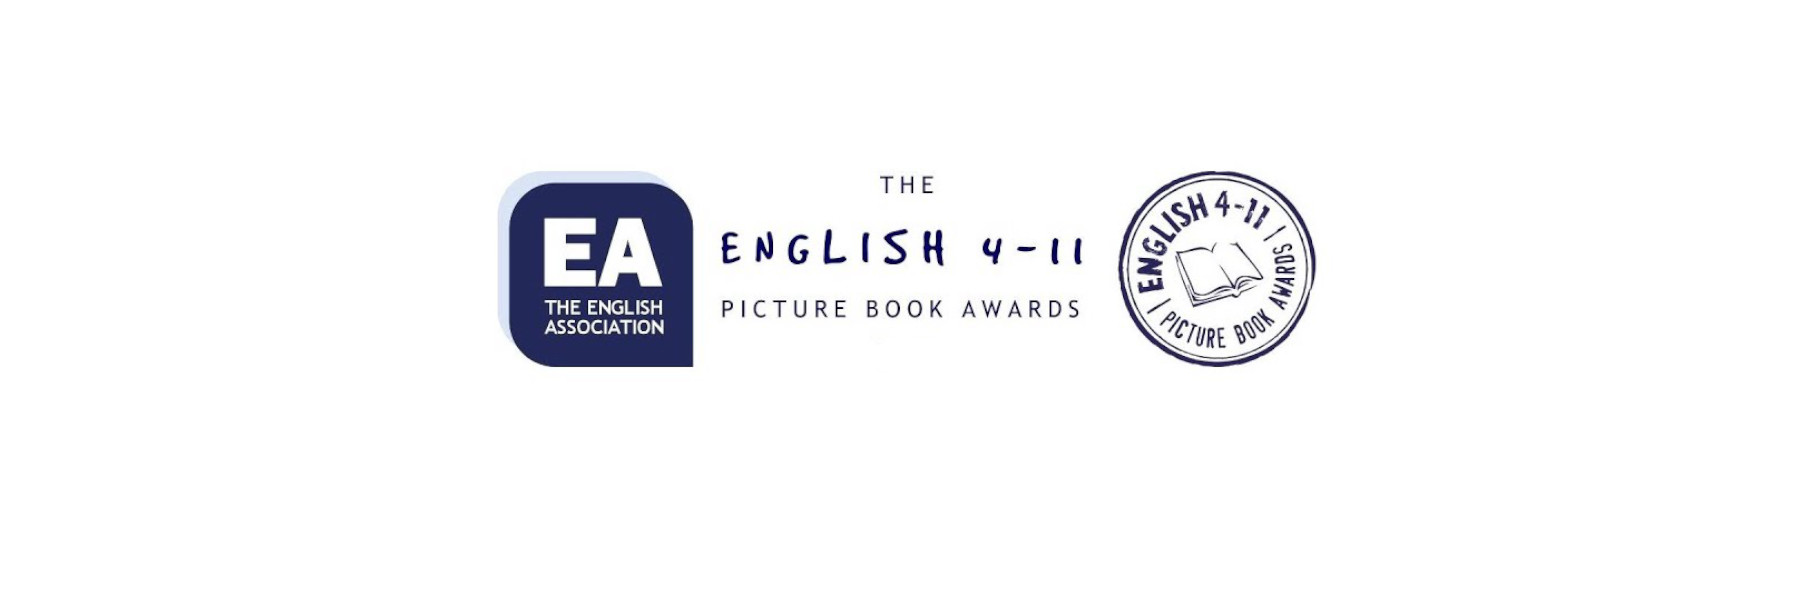 English 4-11 Picture Book Awards 2022